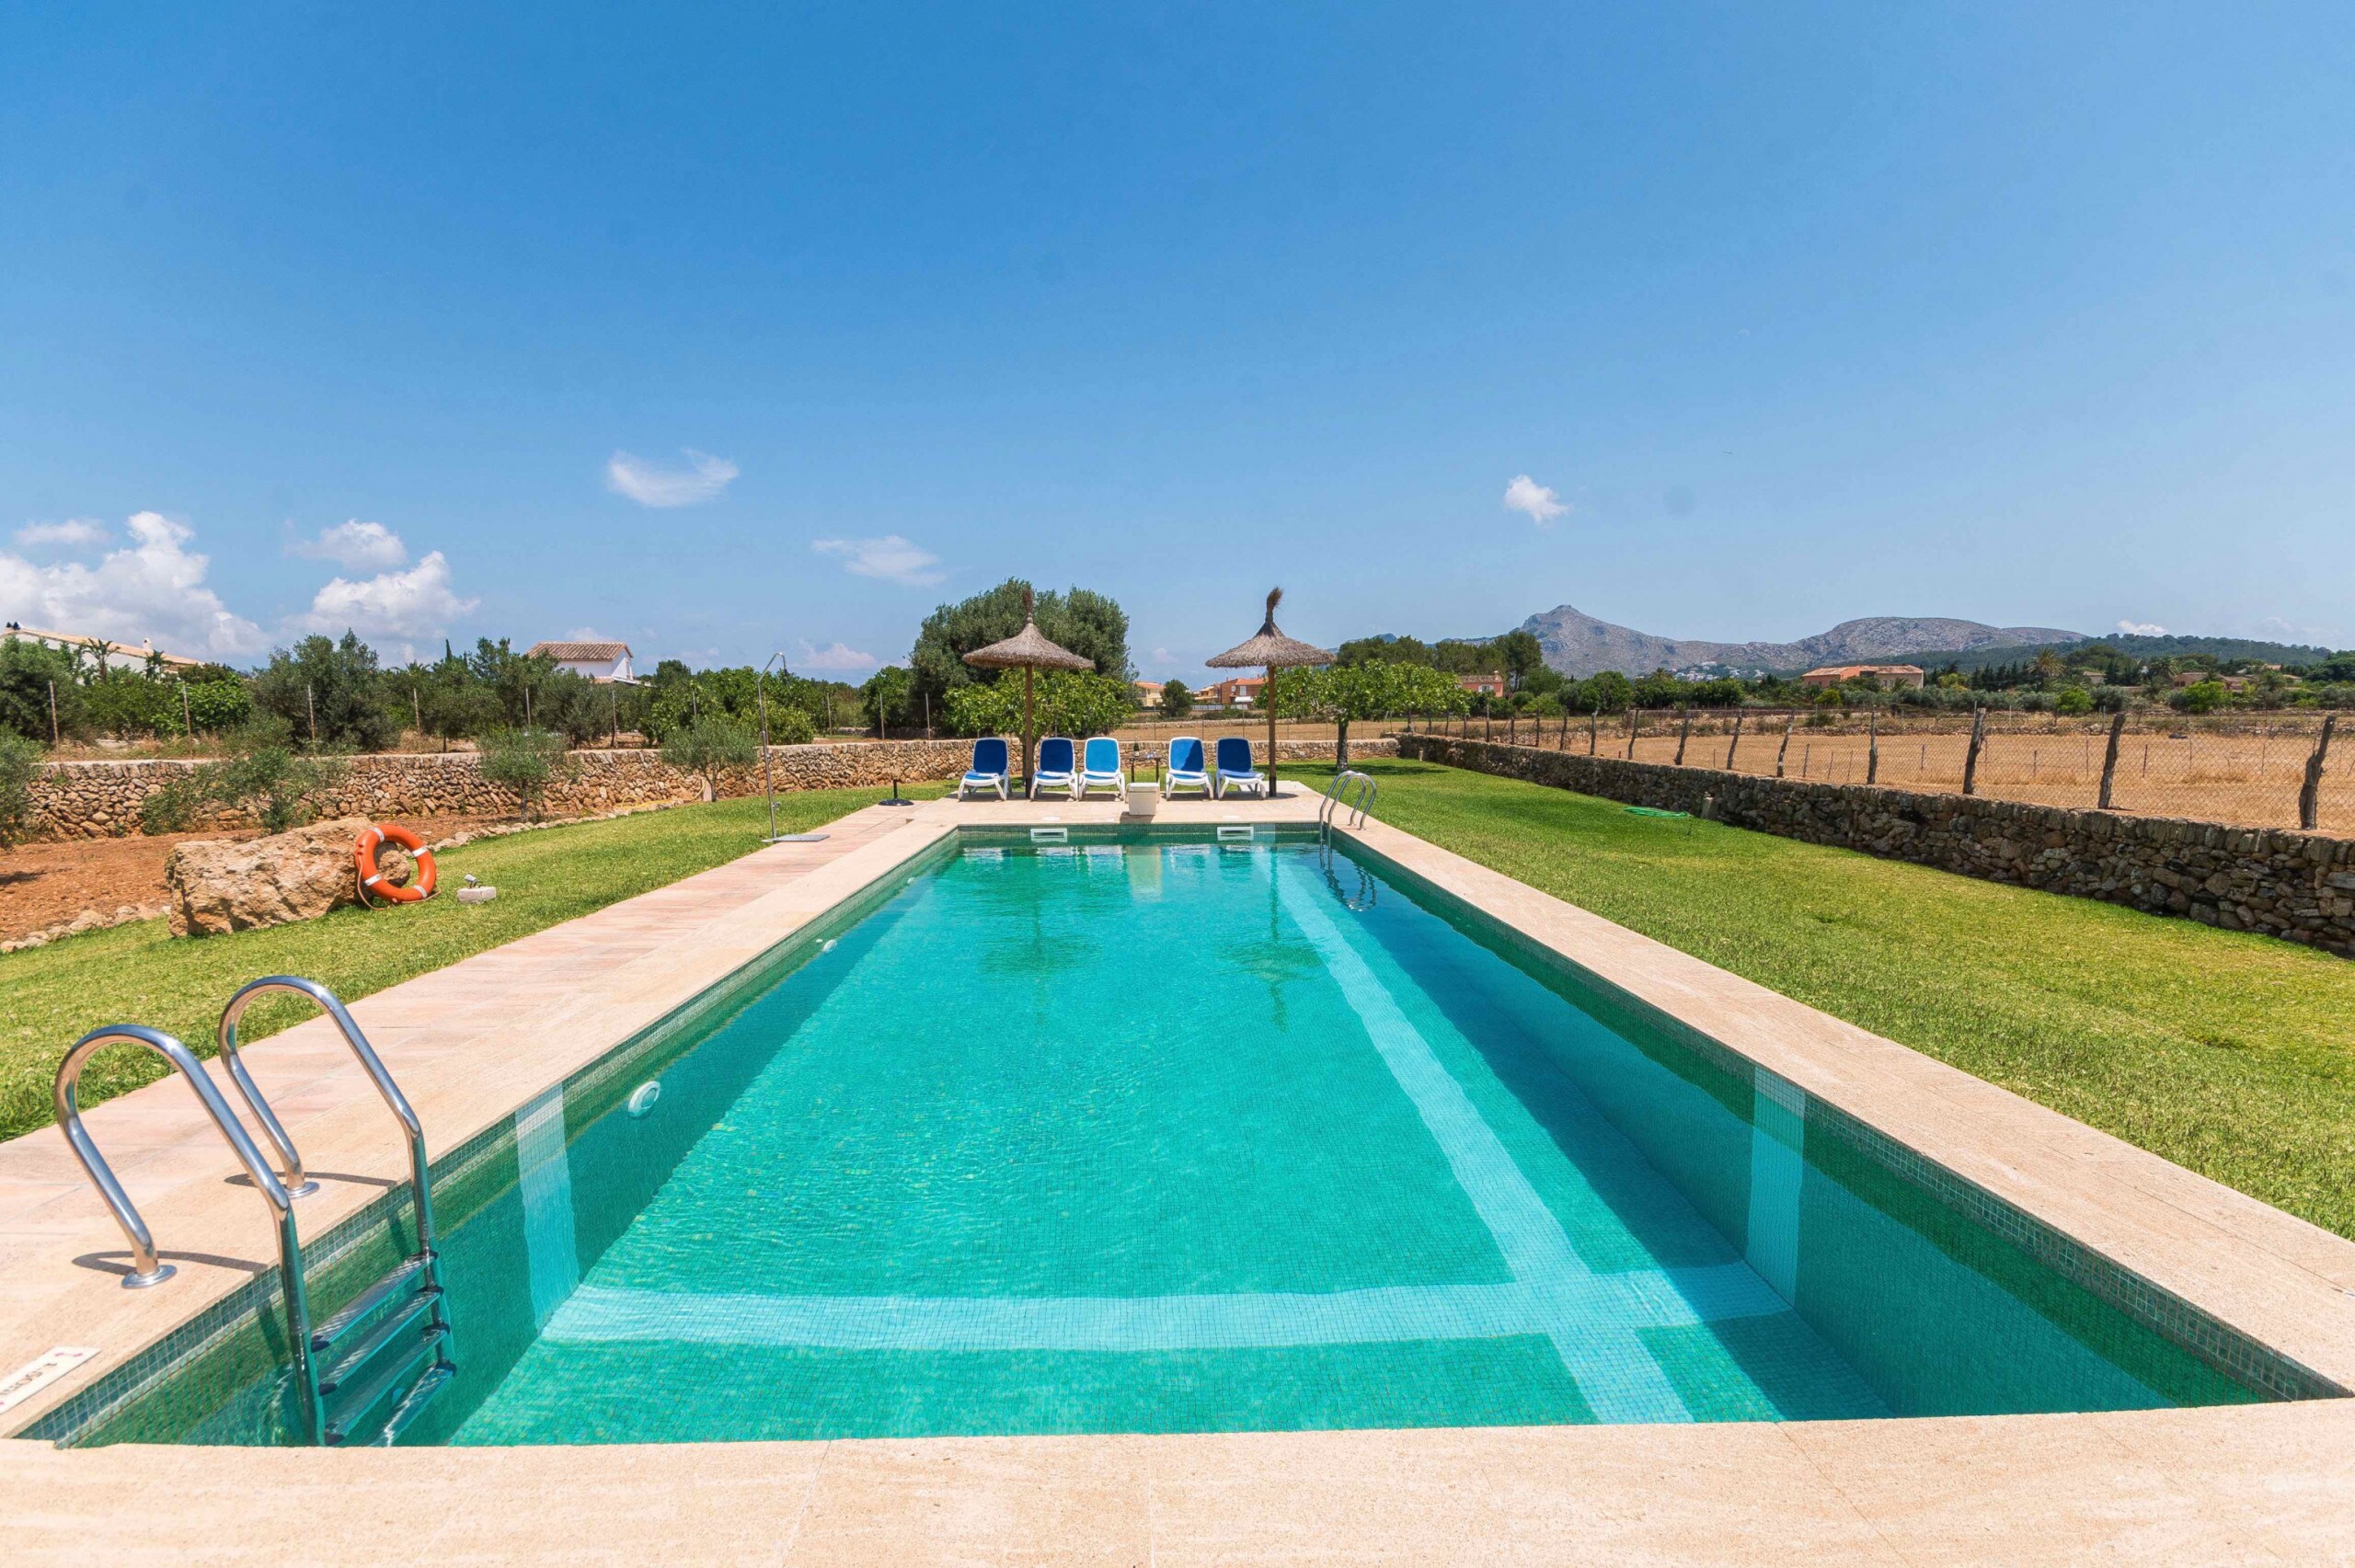 Finca, countryside, nature, swimming pool, tranquillity